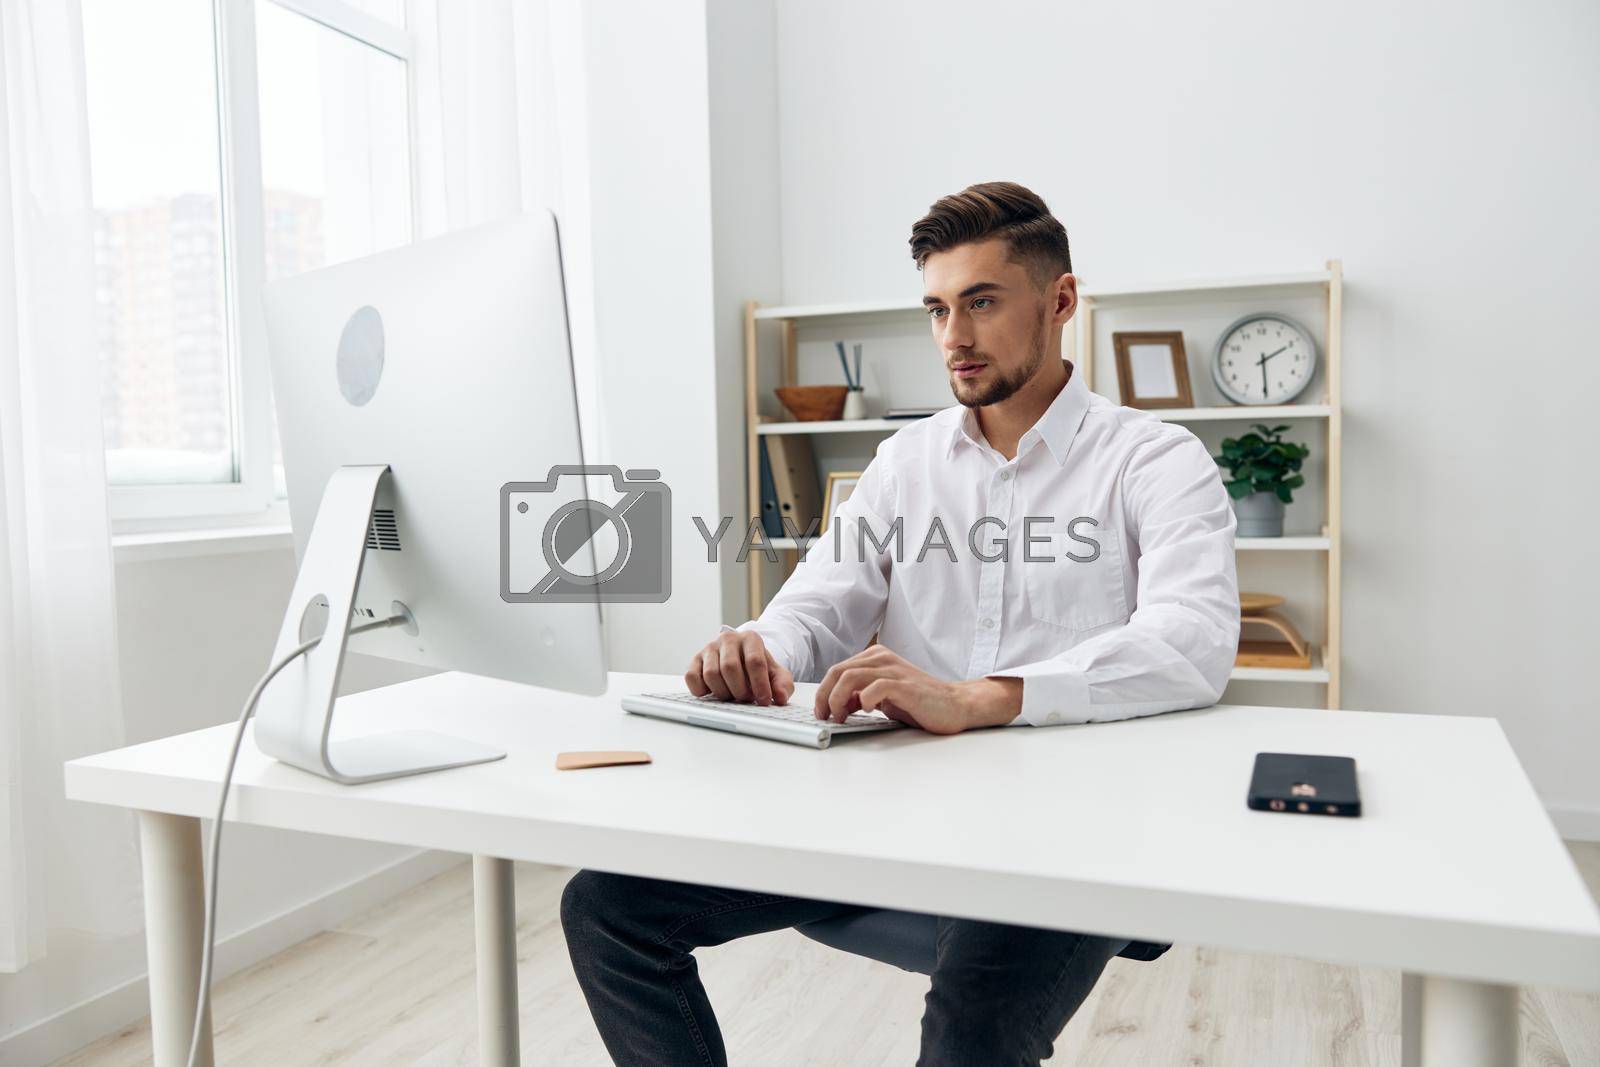 Royalty free image of handsome businessman office worker in a white shirt workplace by SHOTPRIME